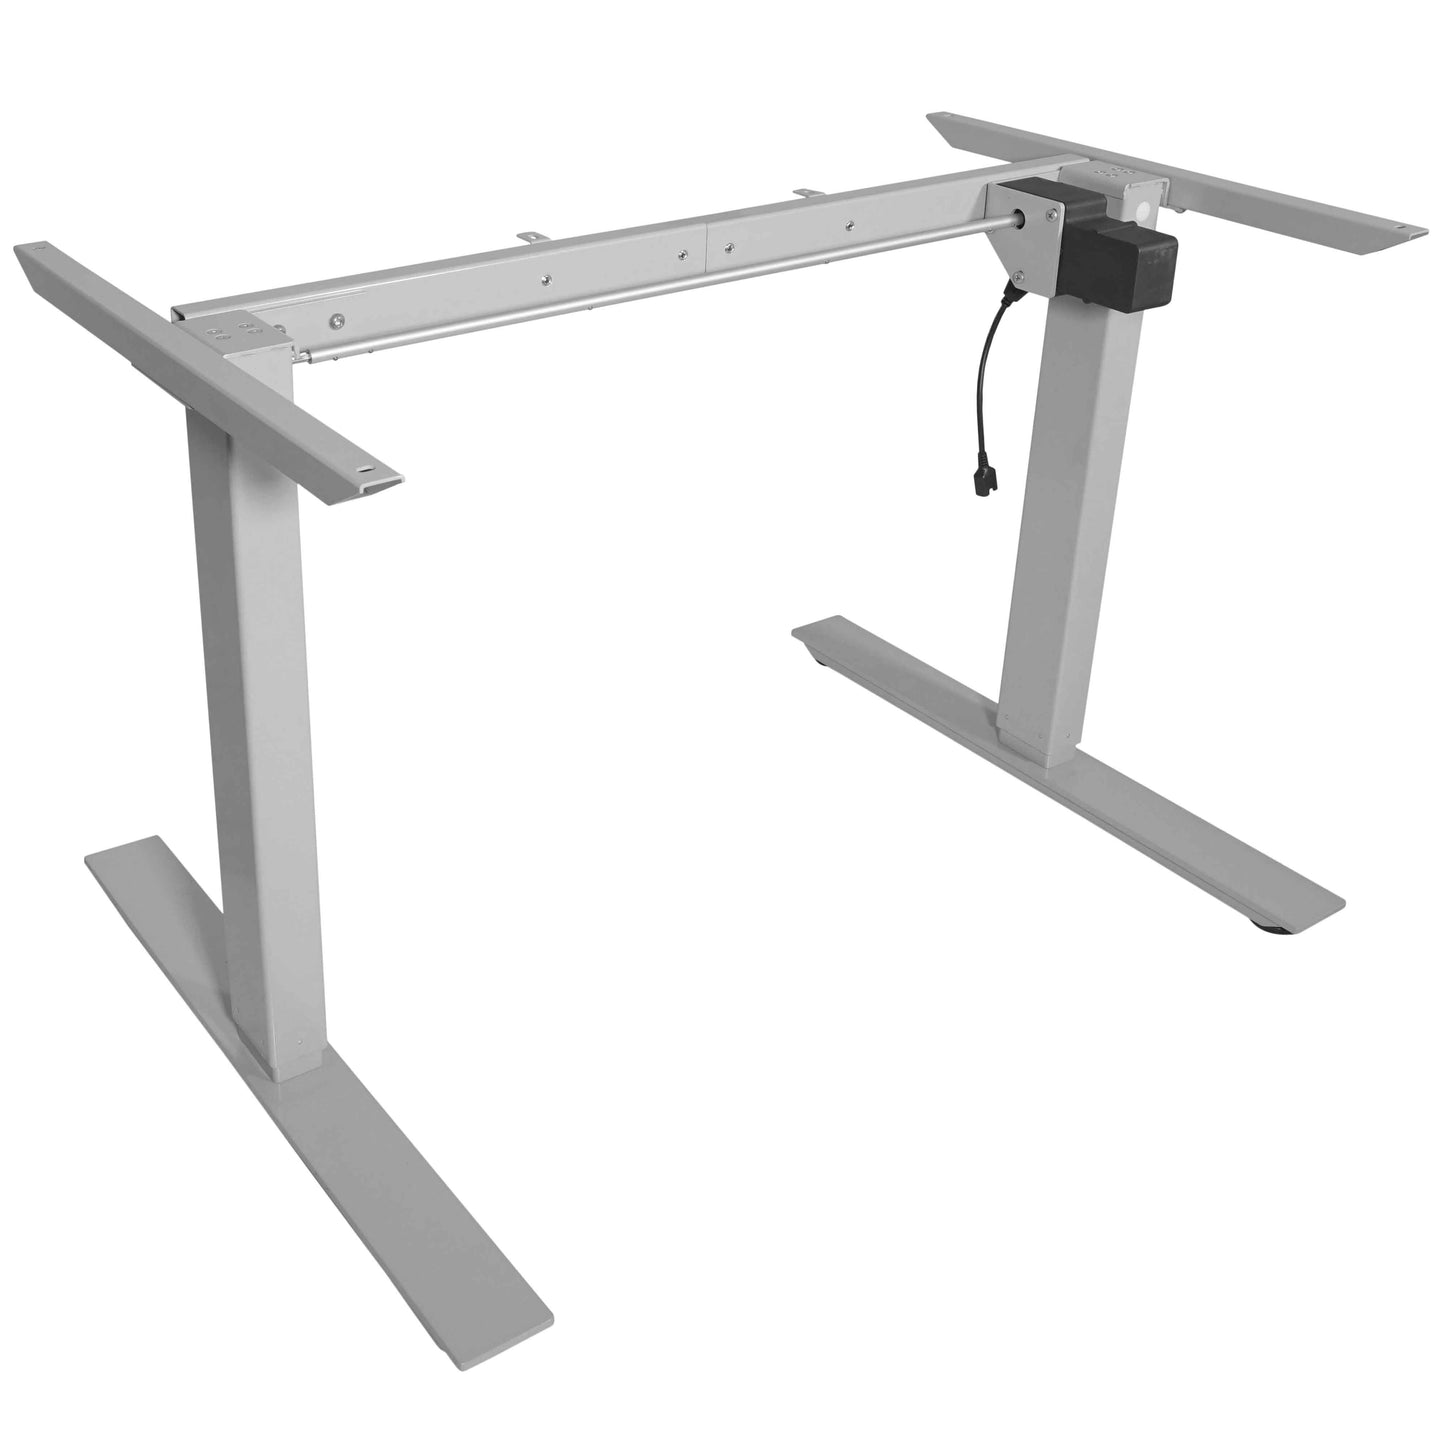 Single Motor Electric Adjustable Height A2 Sit-Stand Desk - view 6